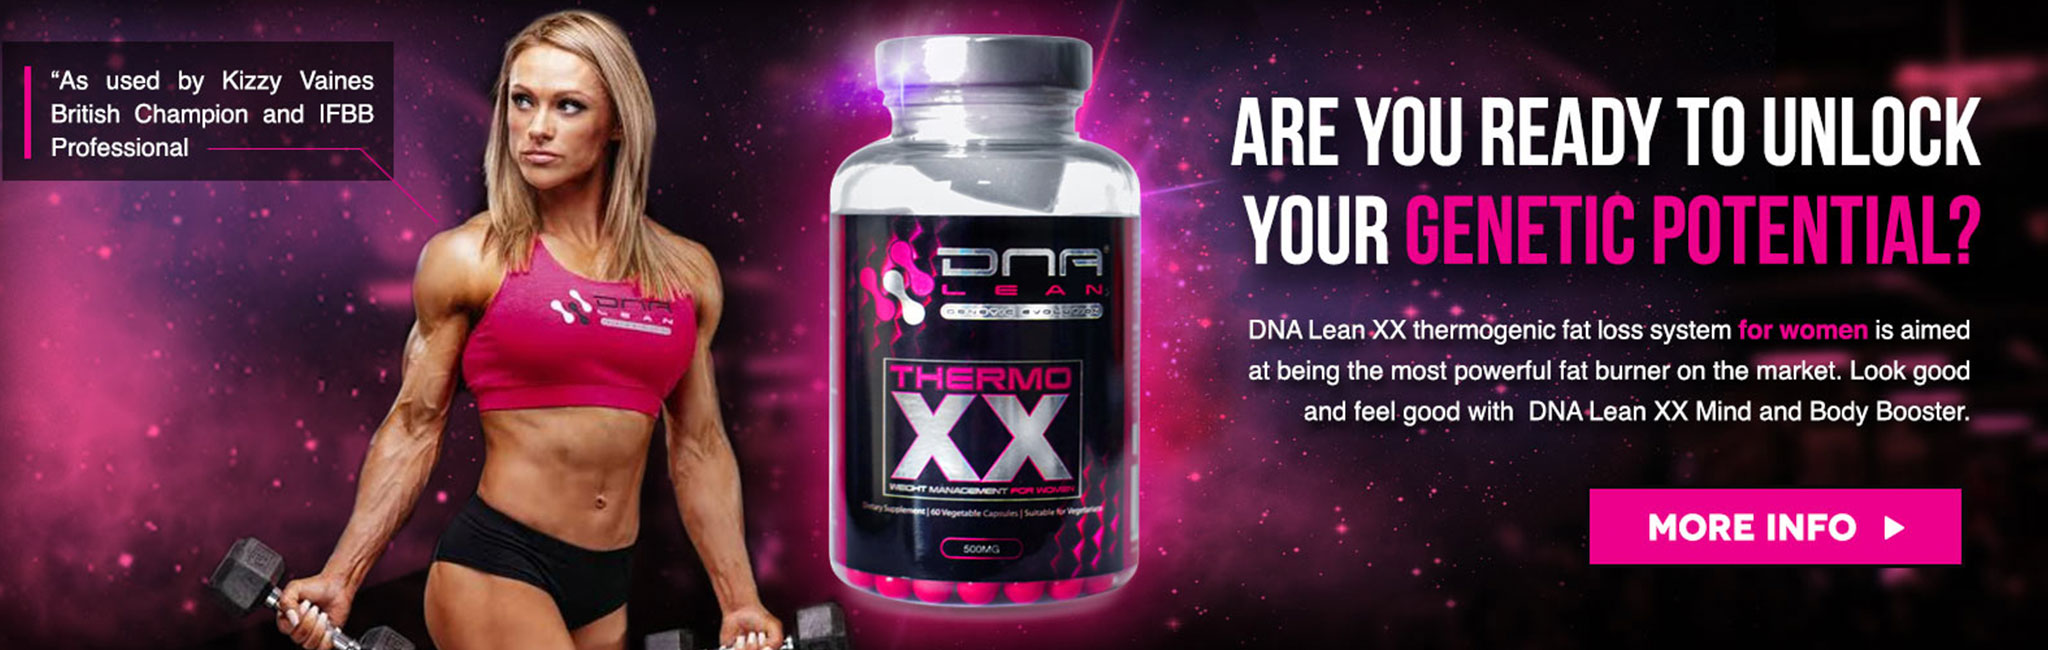 Unlock your genetic potential with DNA Lean thermo XX! A new era of female fat burning has arrived with DNA lean thermo XX!